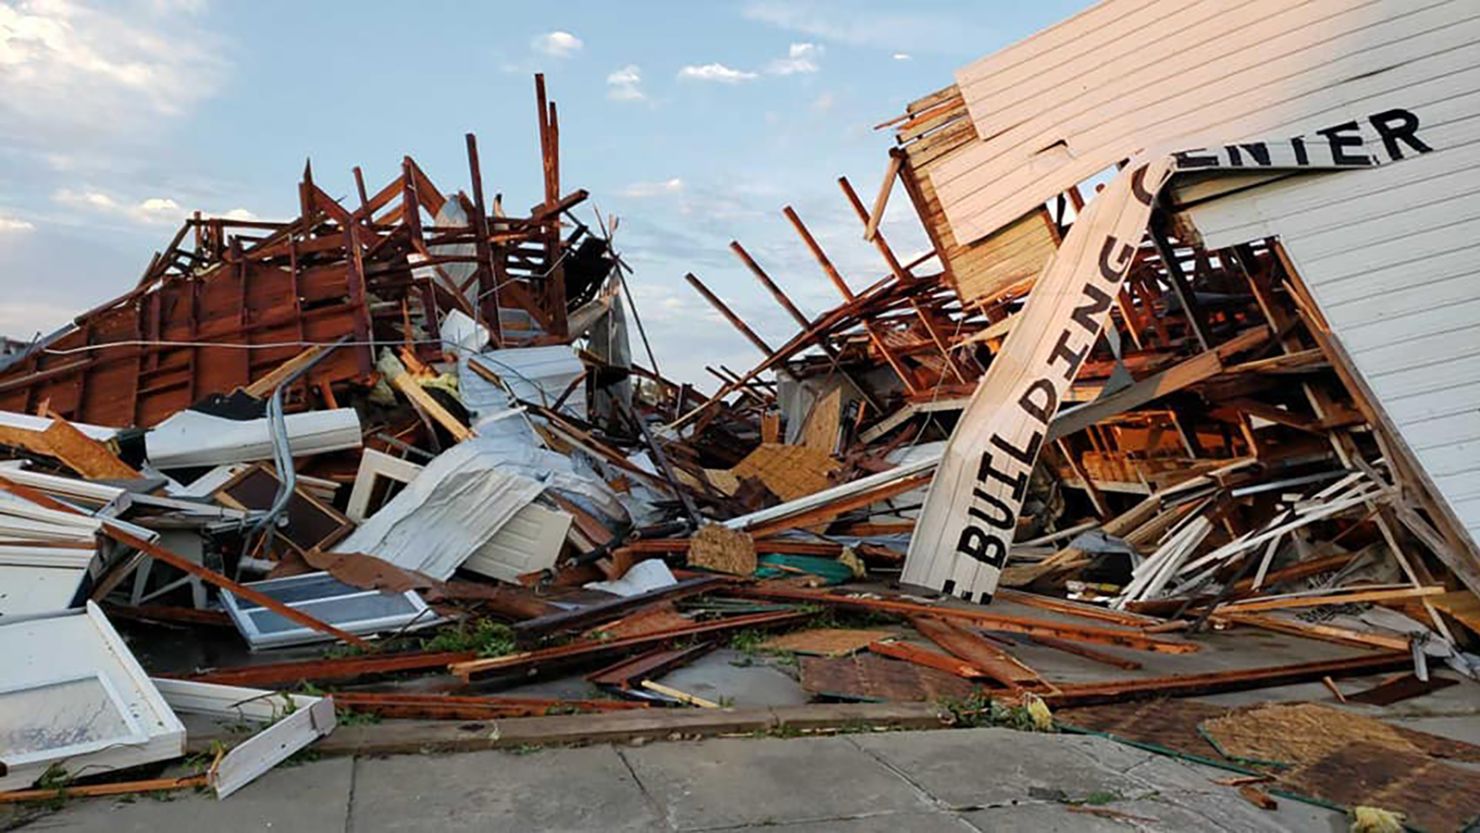 A destructive storm ripped through the town of Burke, South Dakota, on Tuesday night.